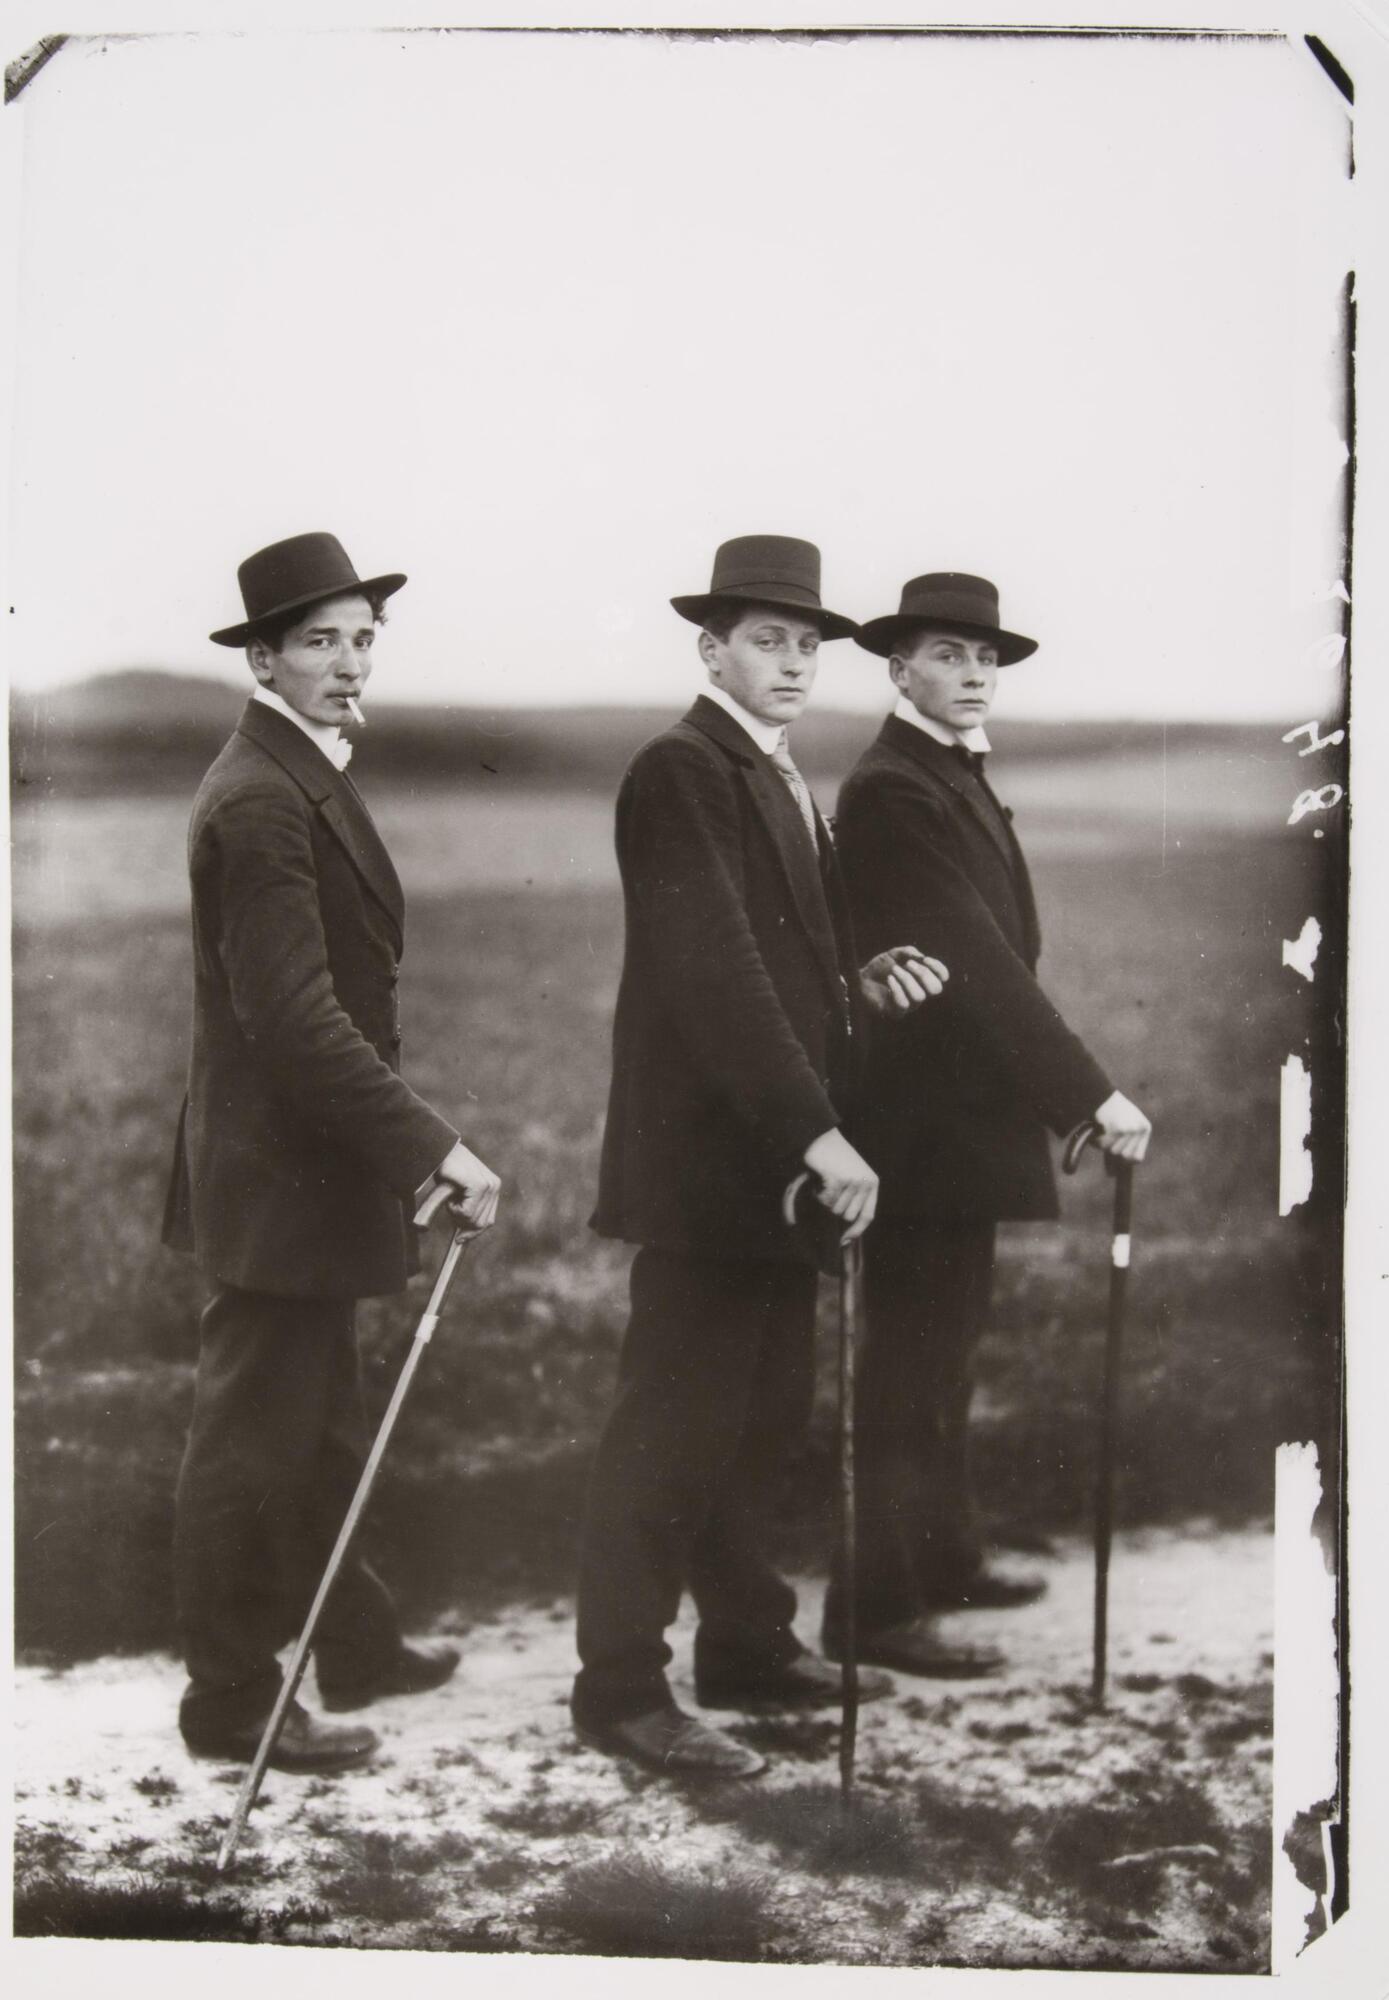 This photographic portrait of three young men shows them dressed in suits, paused during a walk on a rural road.